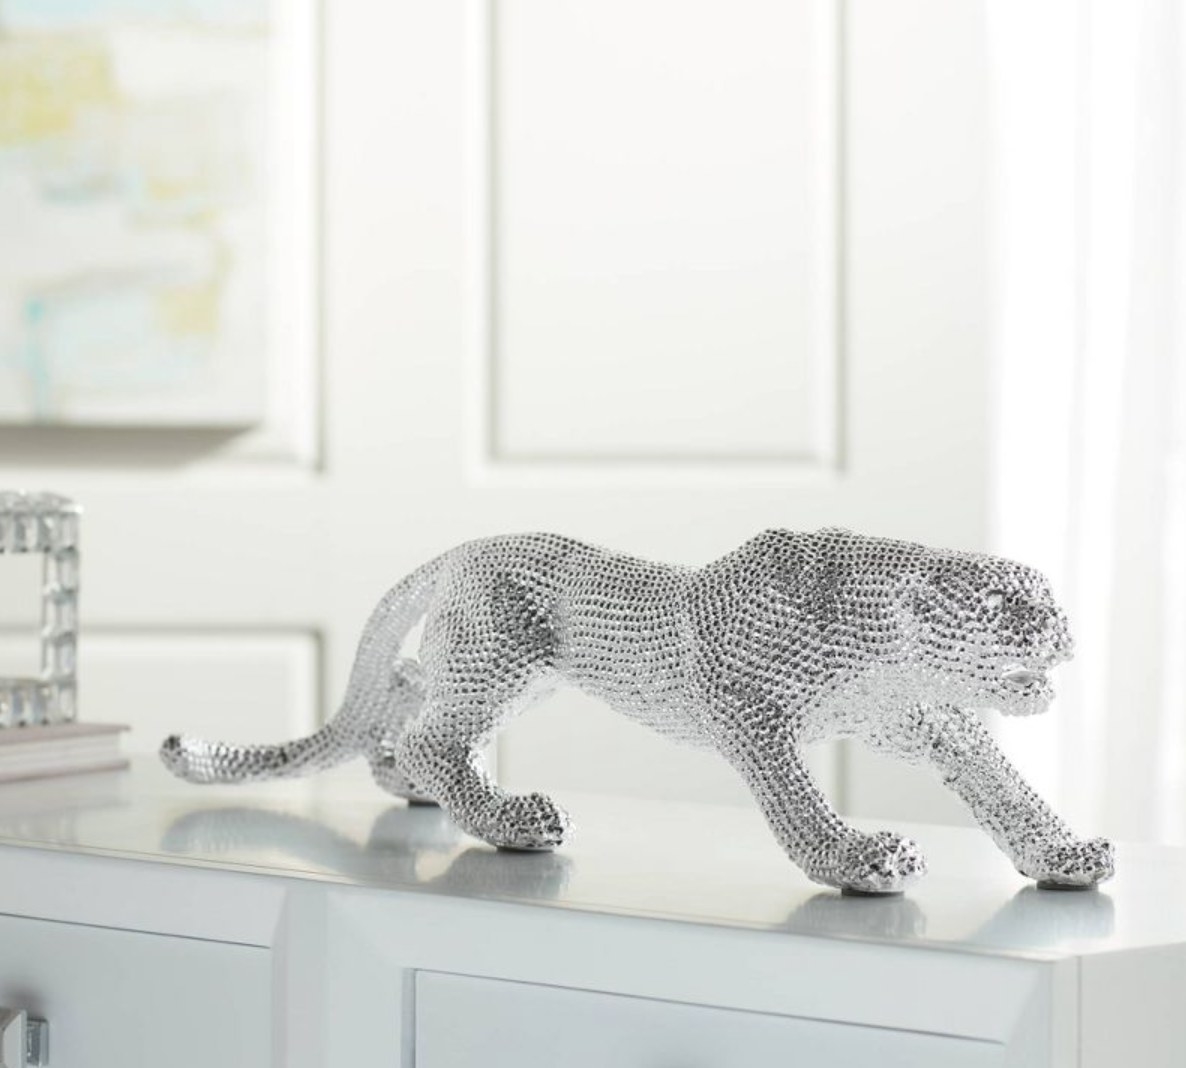 the silver leopard statue on a dresser